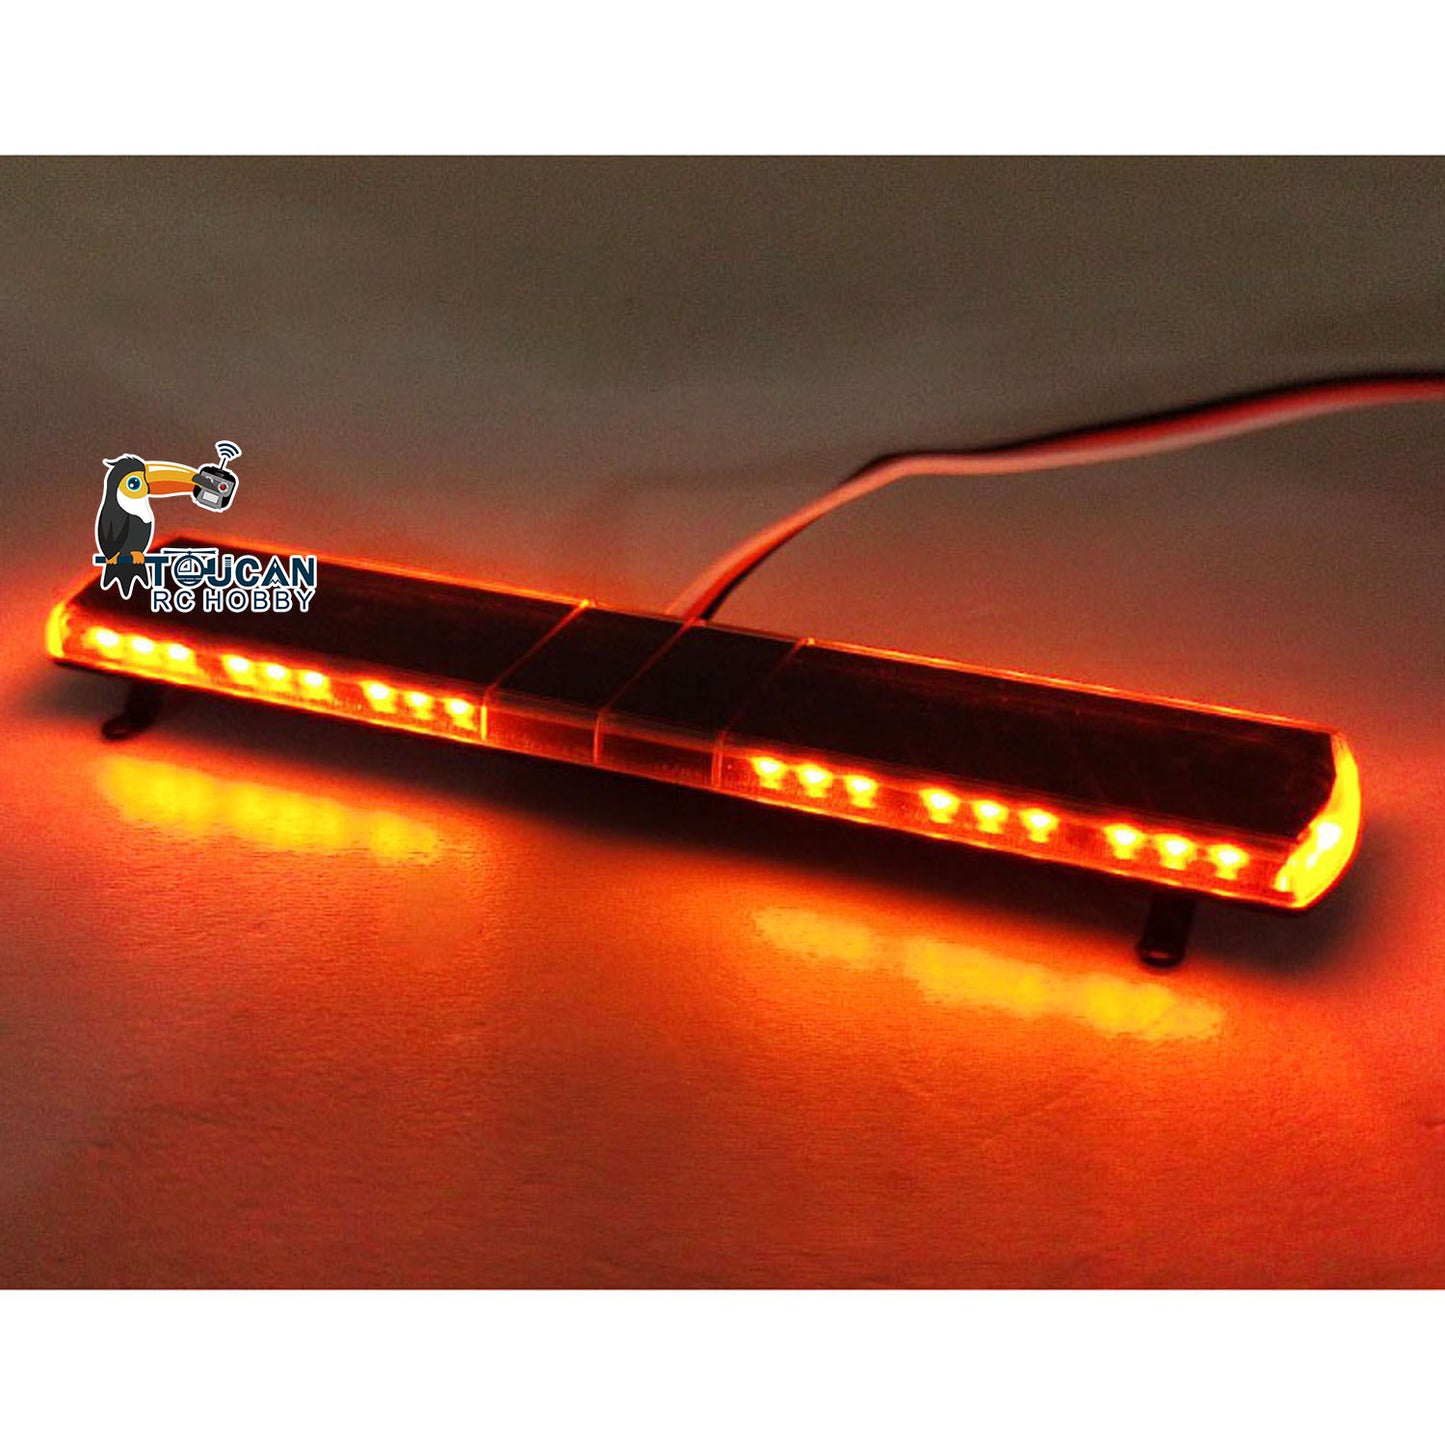 Warning Light Bar Lights for 1/14 RC Tractor Truck Remote Controlled Dump Car Construction Vehicle Hobby Models DIY Parts